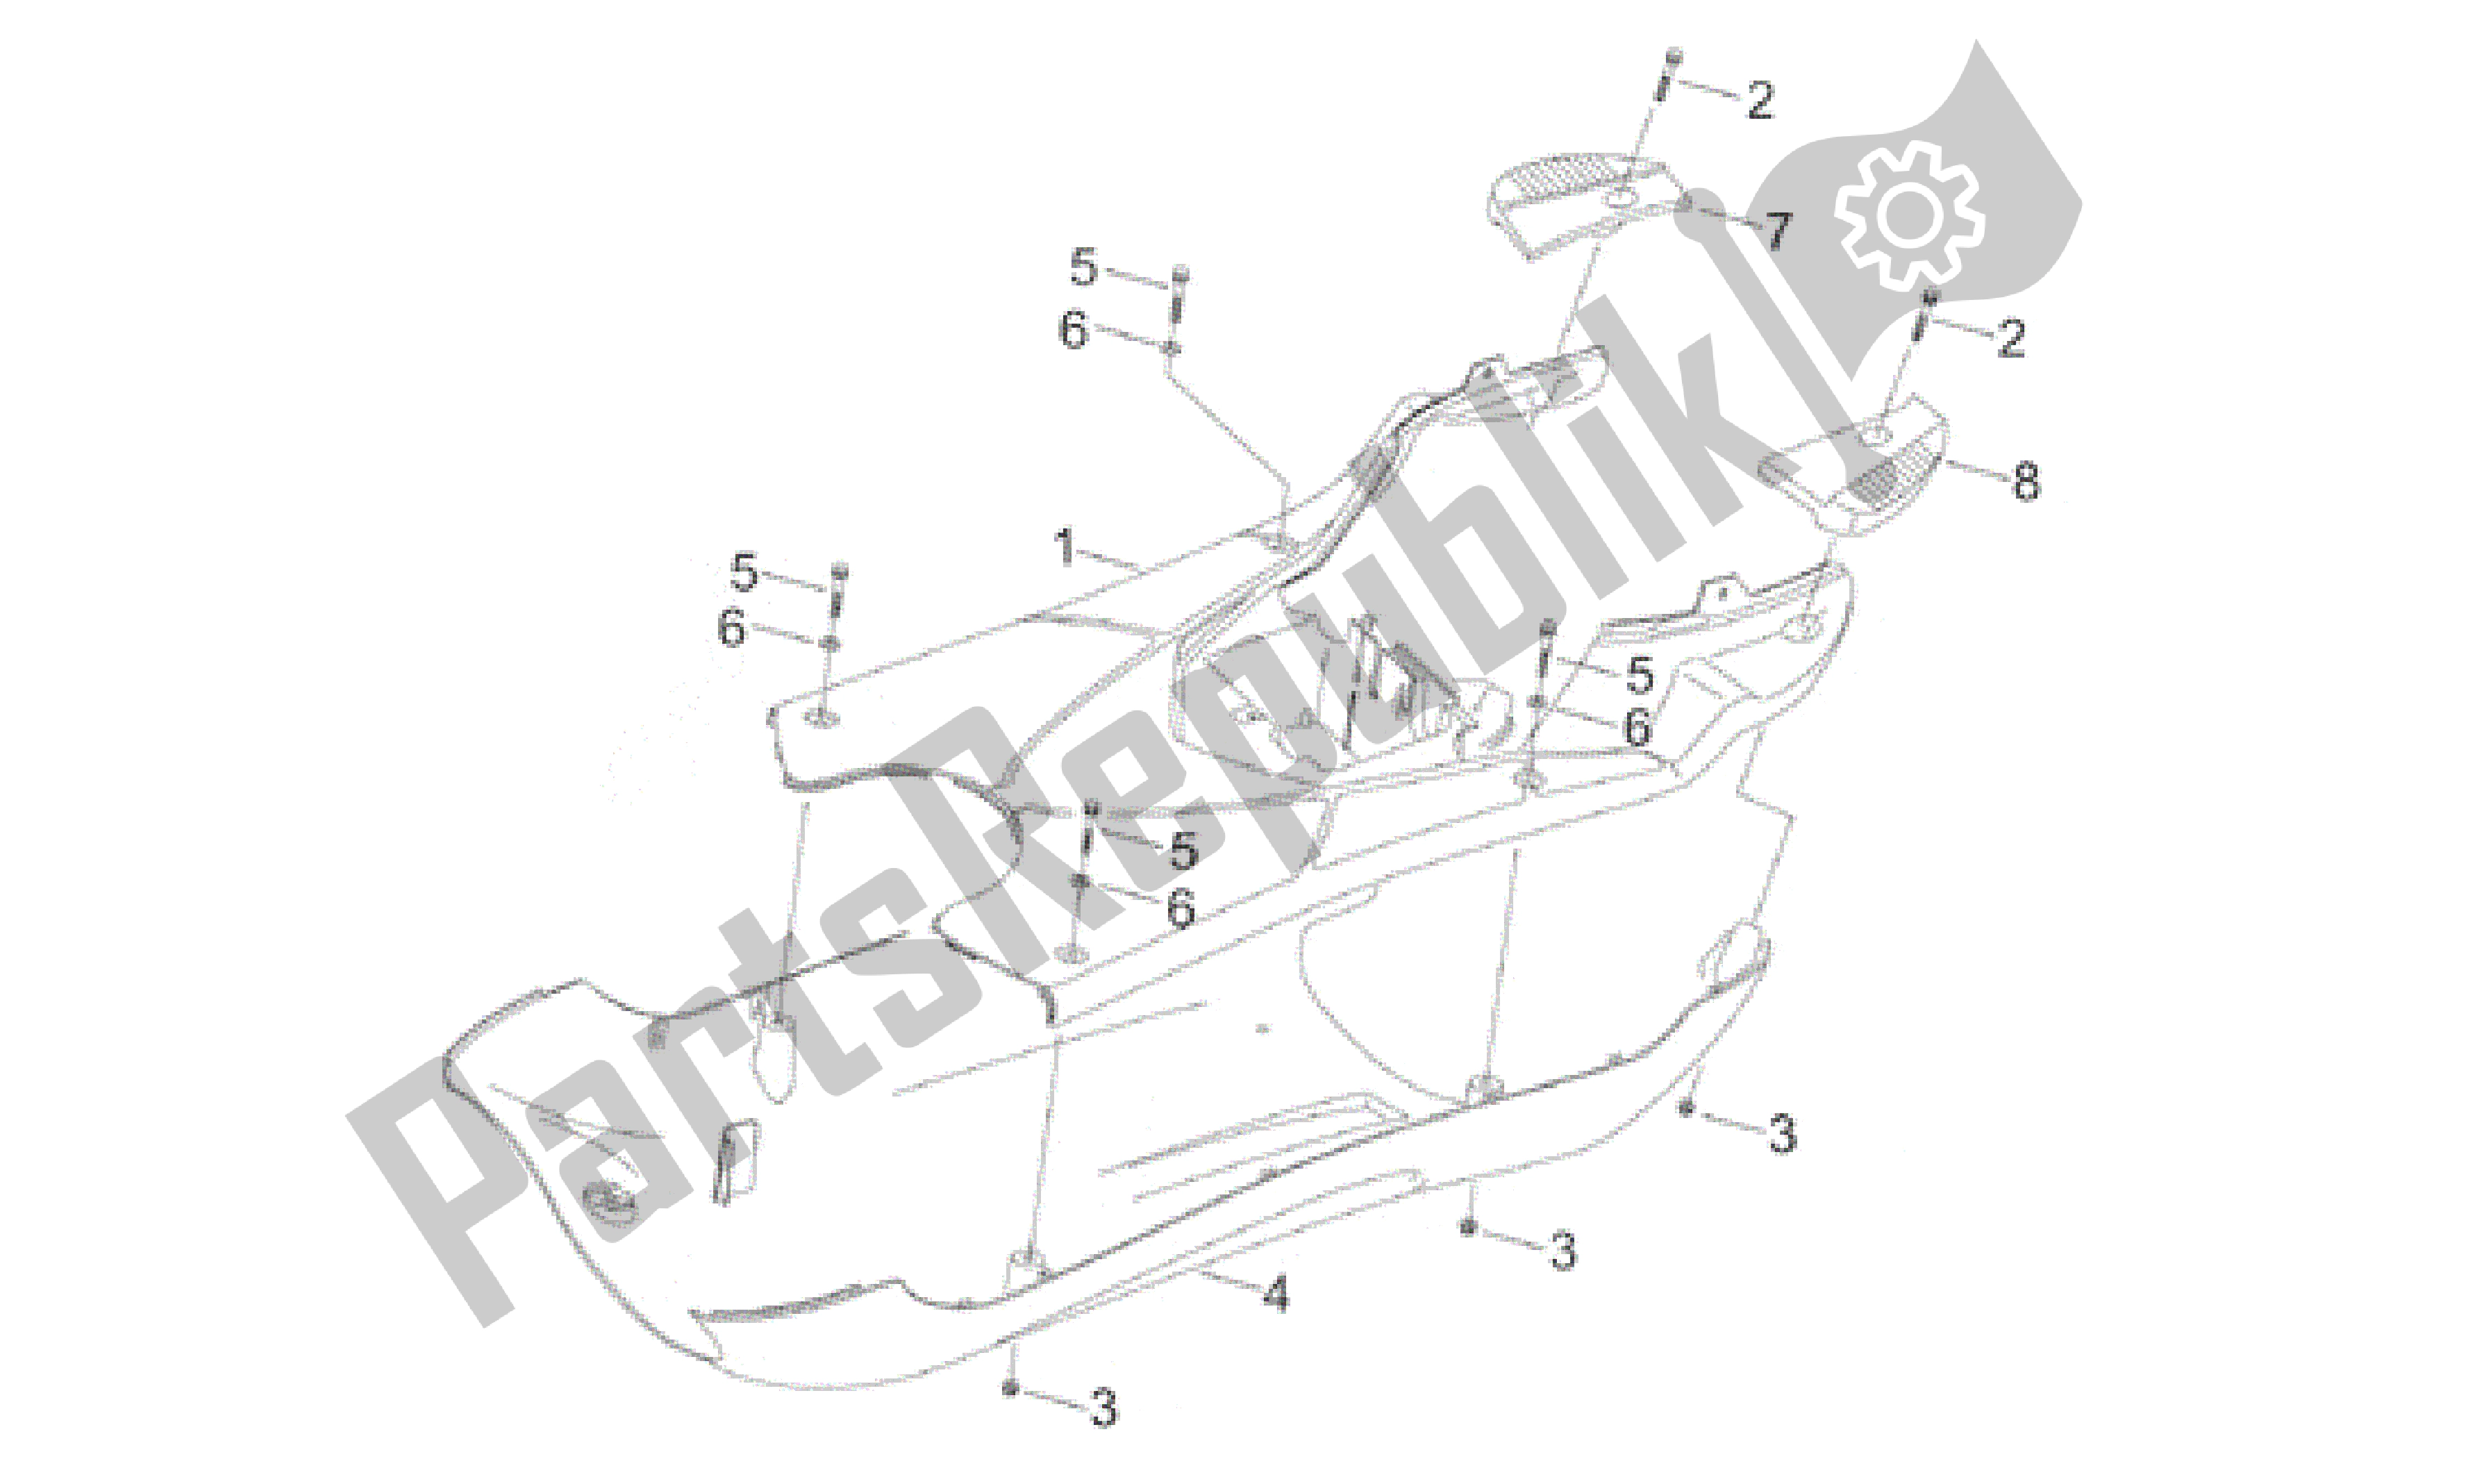 All parts for the Central Body - Panel of the Aprilia Sonic 50 1998 - 2001